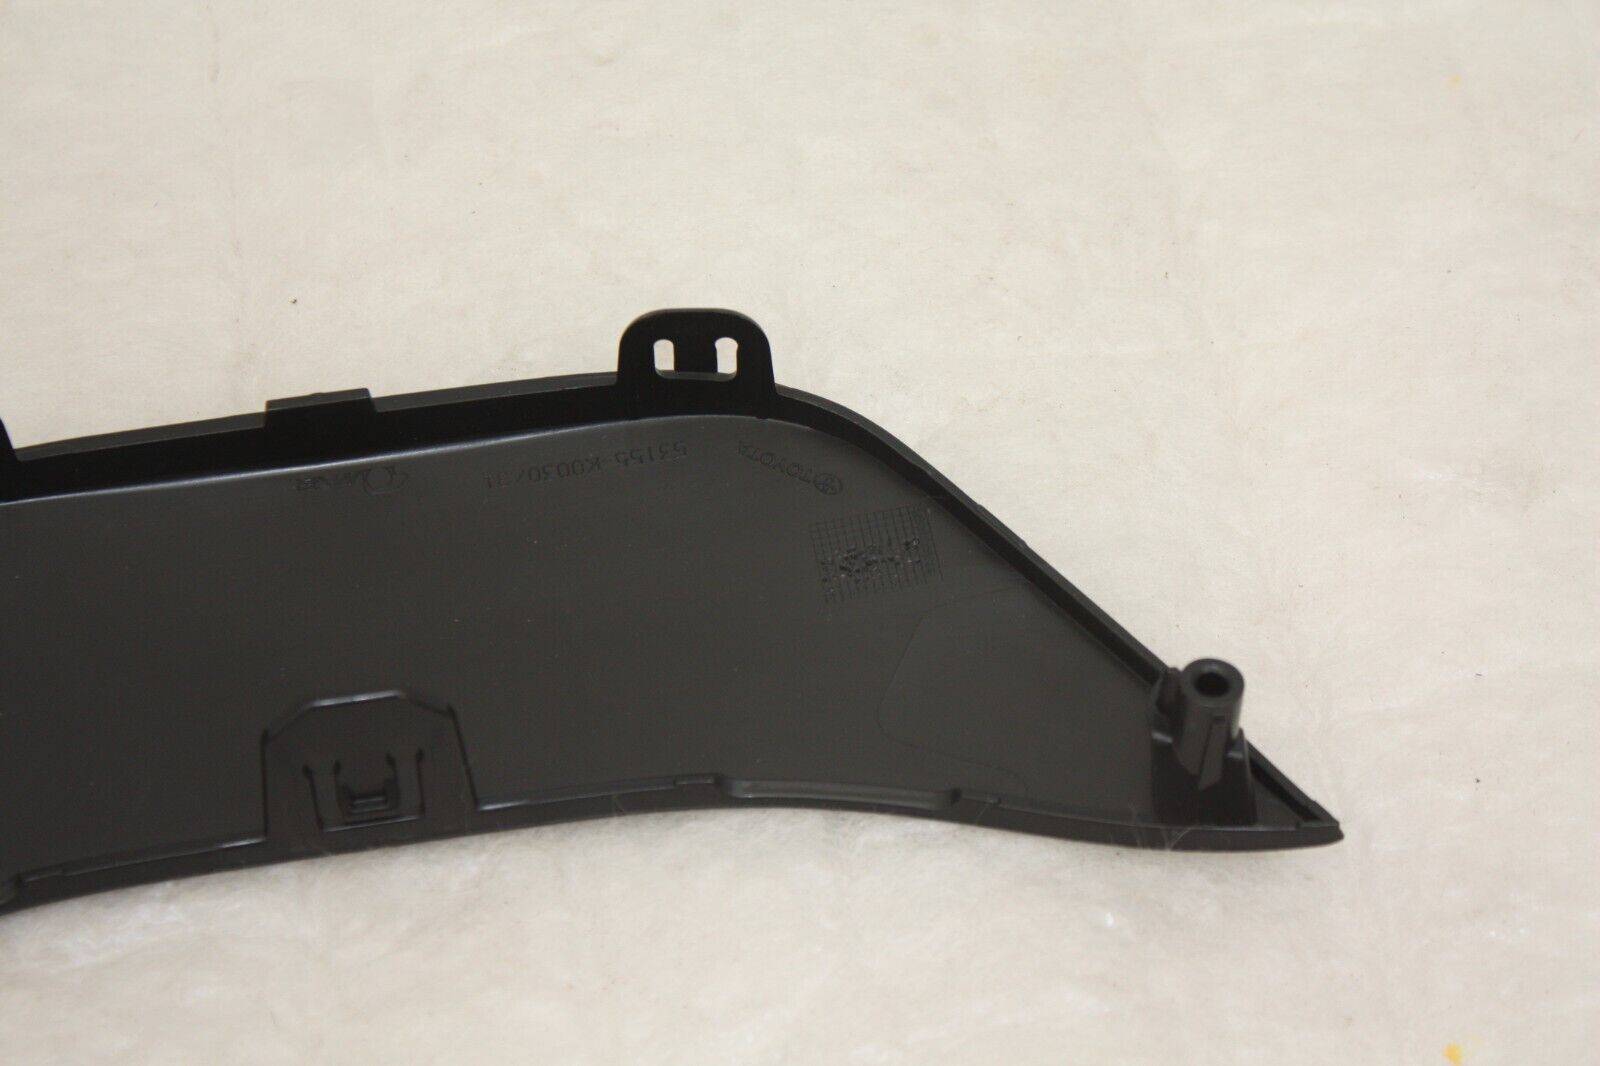 Toyota-Yaris-Front-Bumper-Grill-Cover-2020-ON-53155-K0031-Genuine-176345660711-5